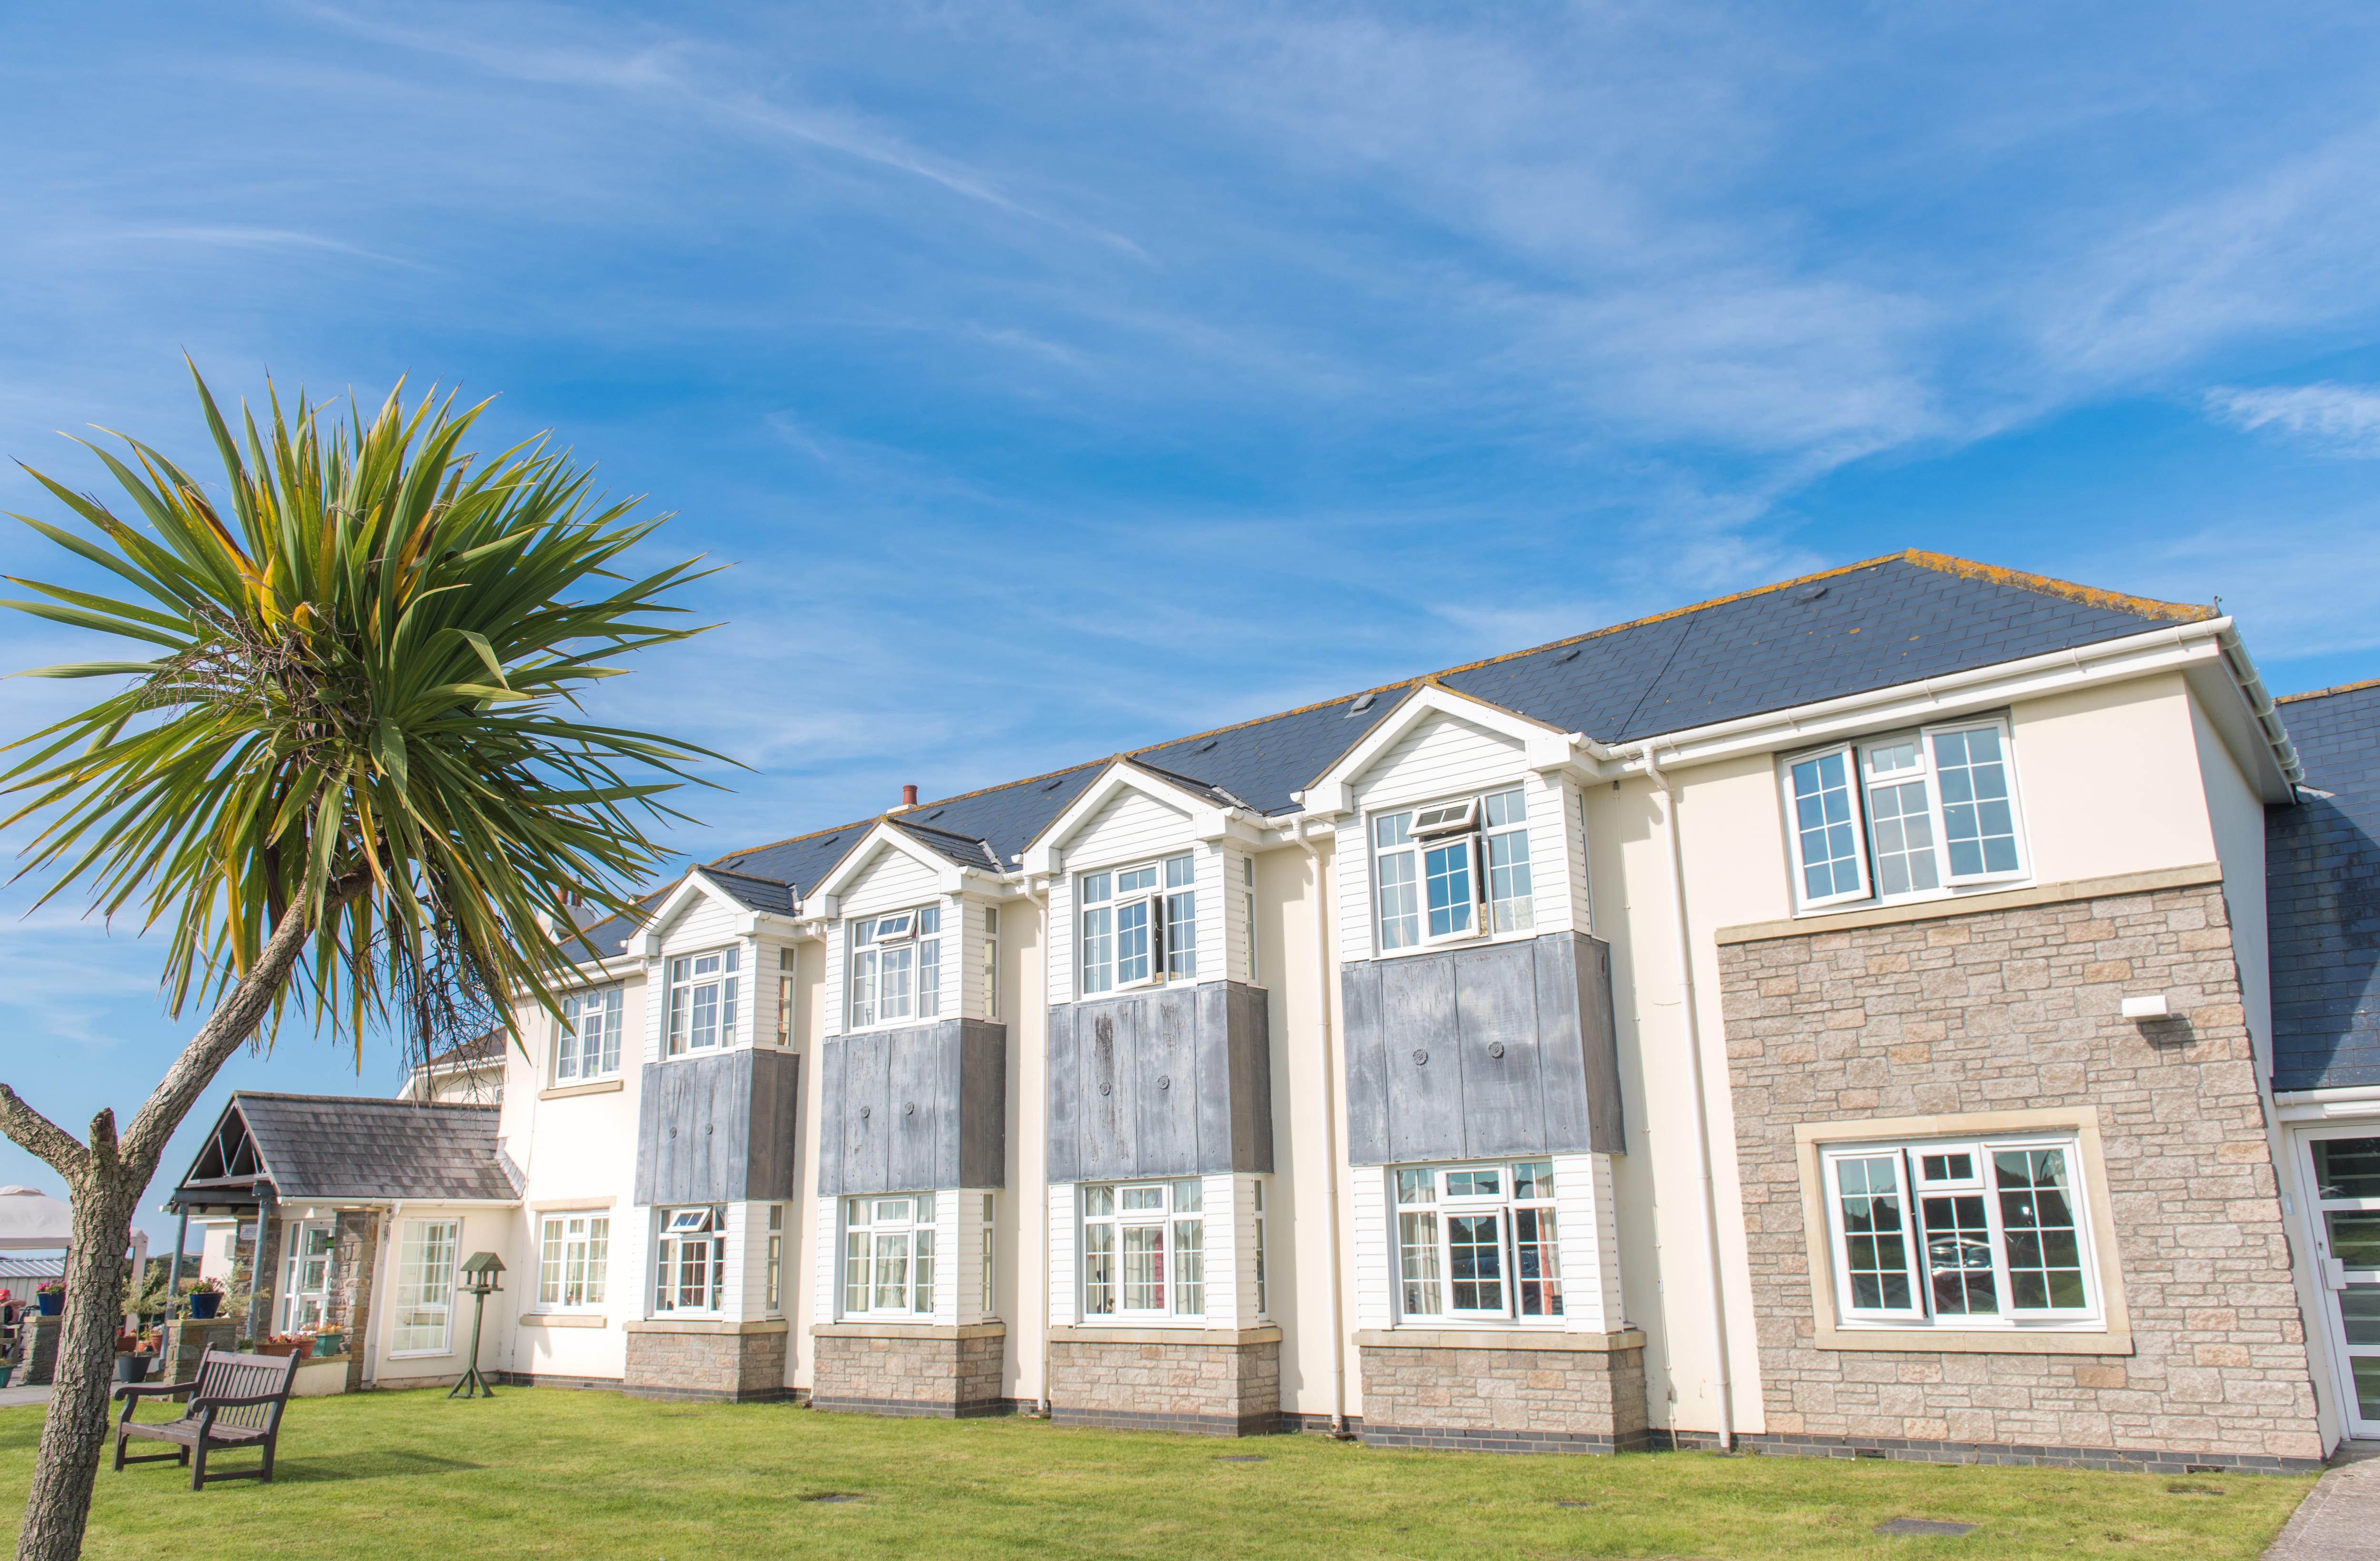 Exterior of Picton Court Care Home in Porthcawl